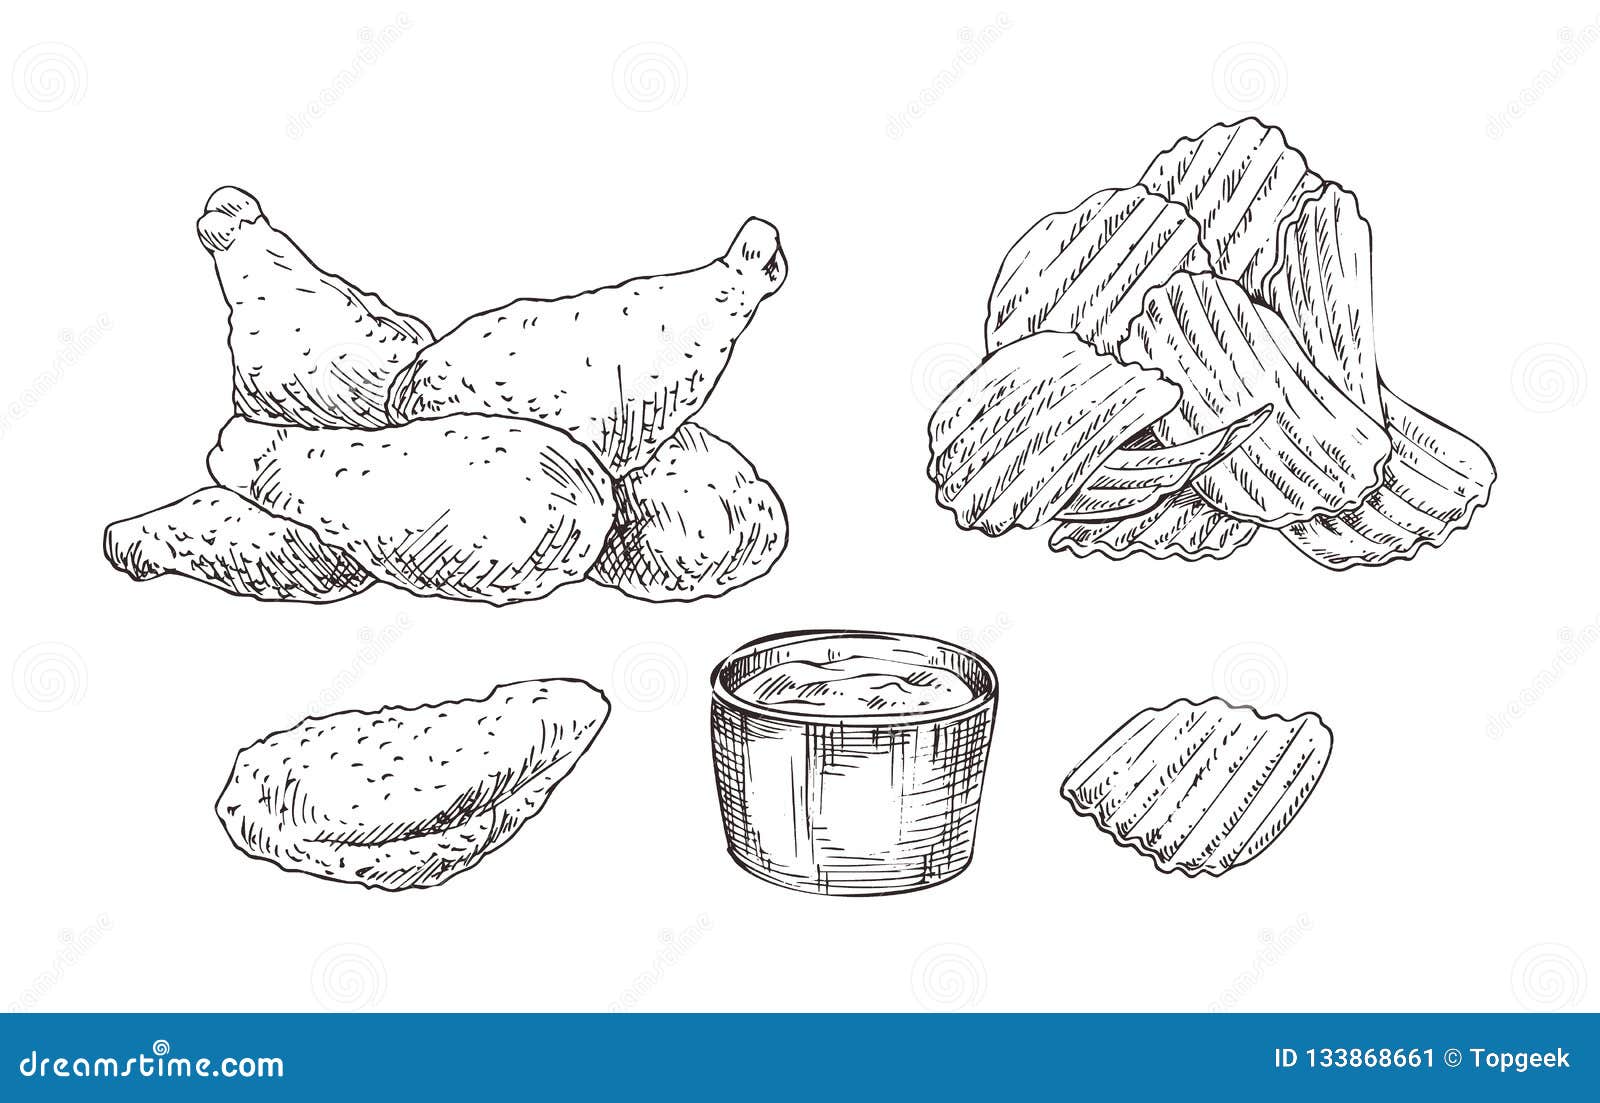 chicken nugget drawing easy - Clip Art Library